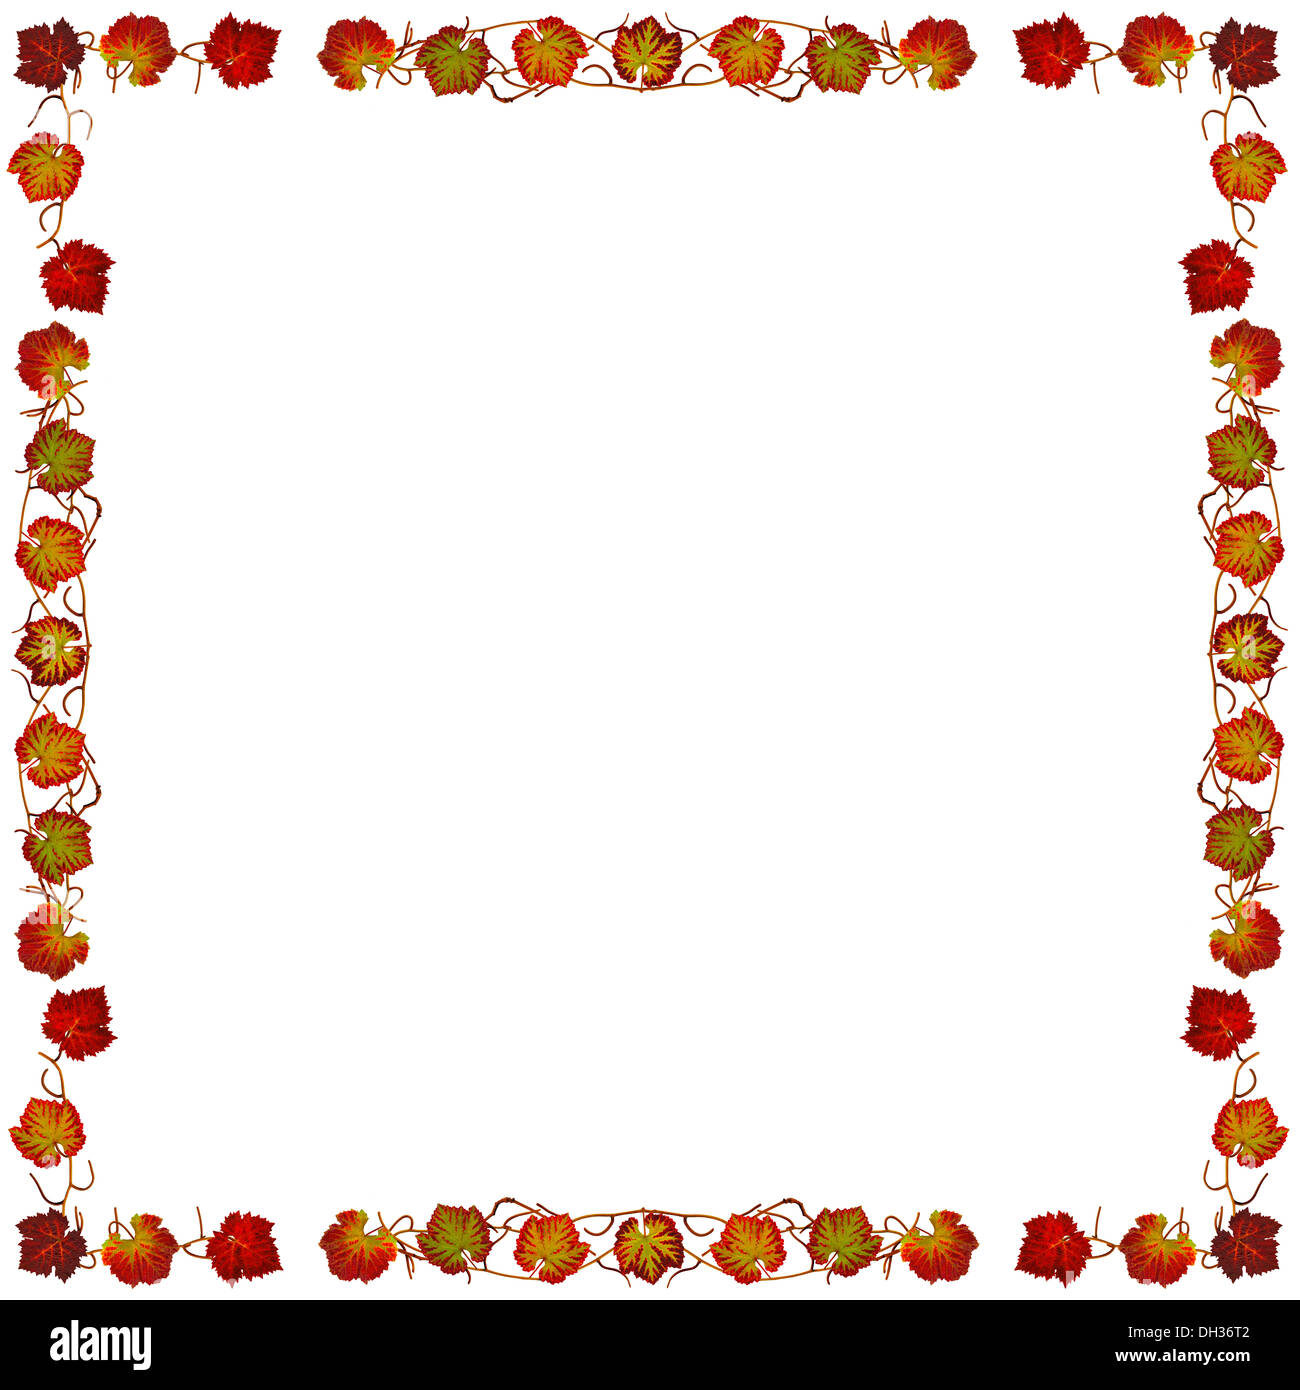 Frame with colorful leaves of vines Stock Photo